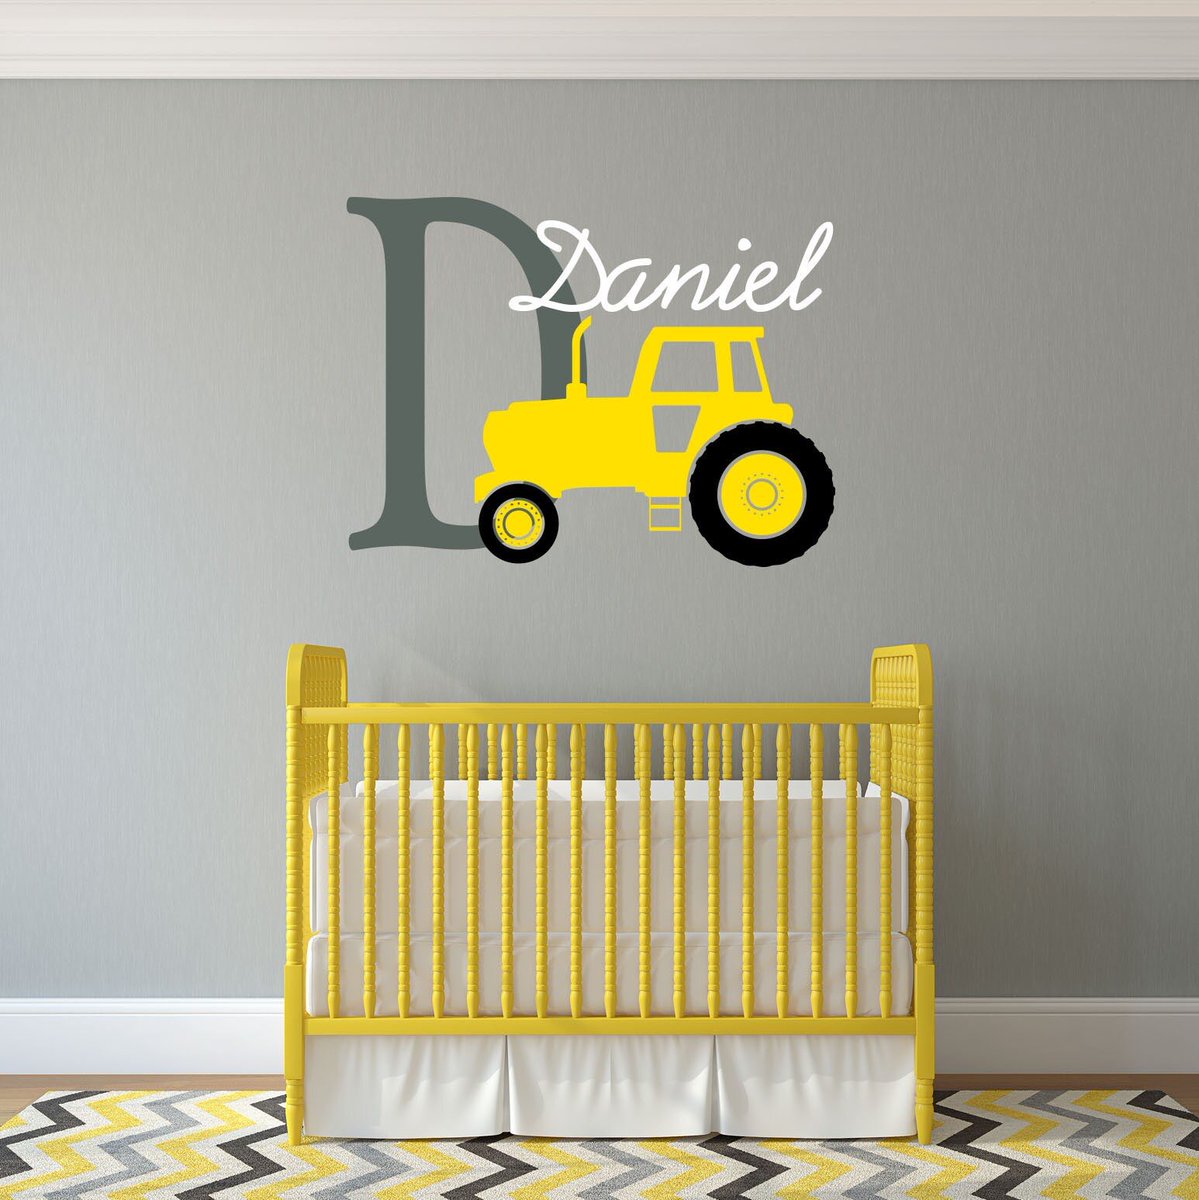 We love the tractor loving kids! What a great gift this would make #tractor #farmerkids #wallart #decal #sticker #irishbusiness Worldwide shipping